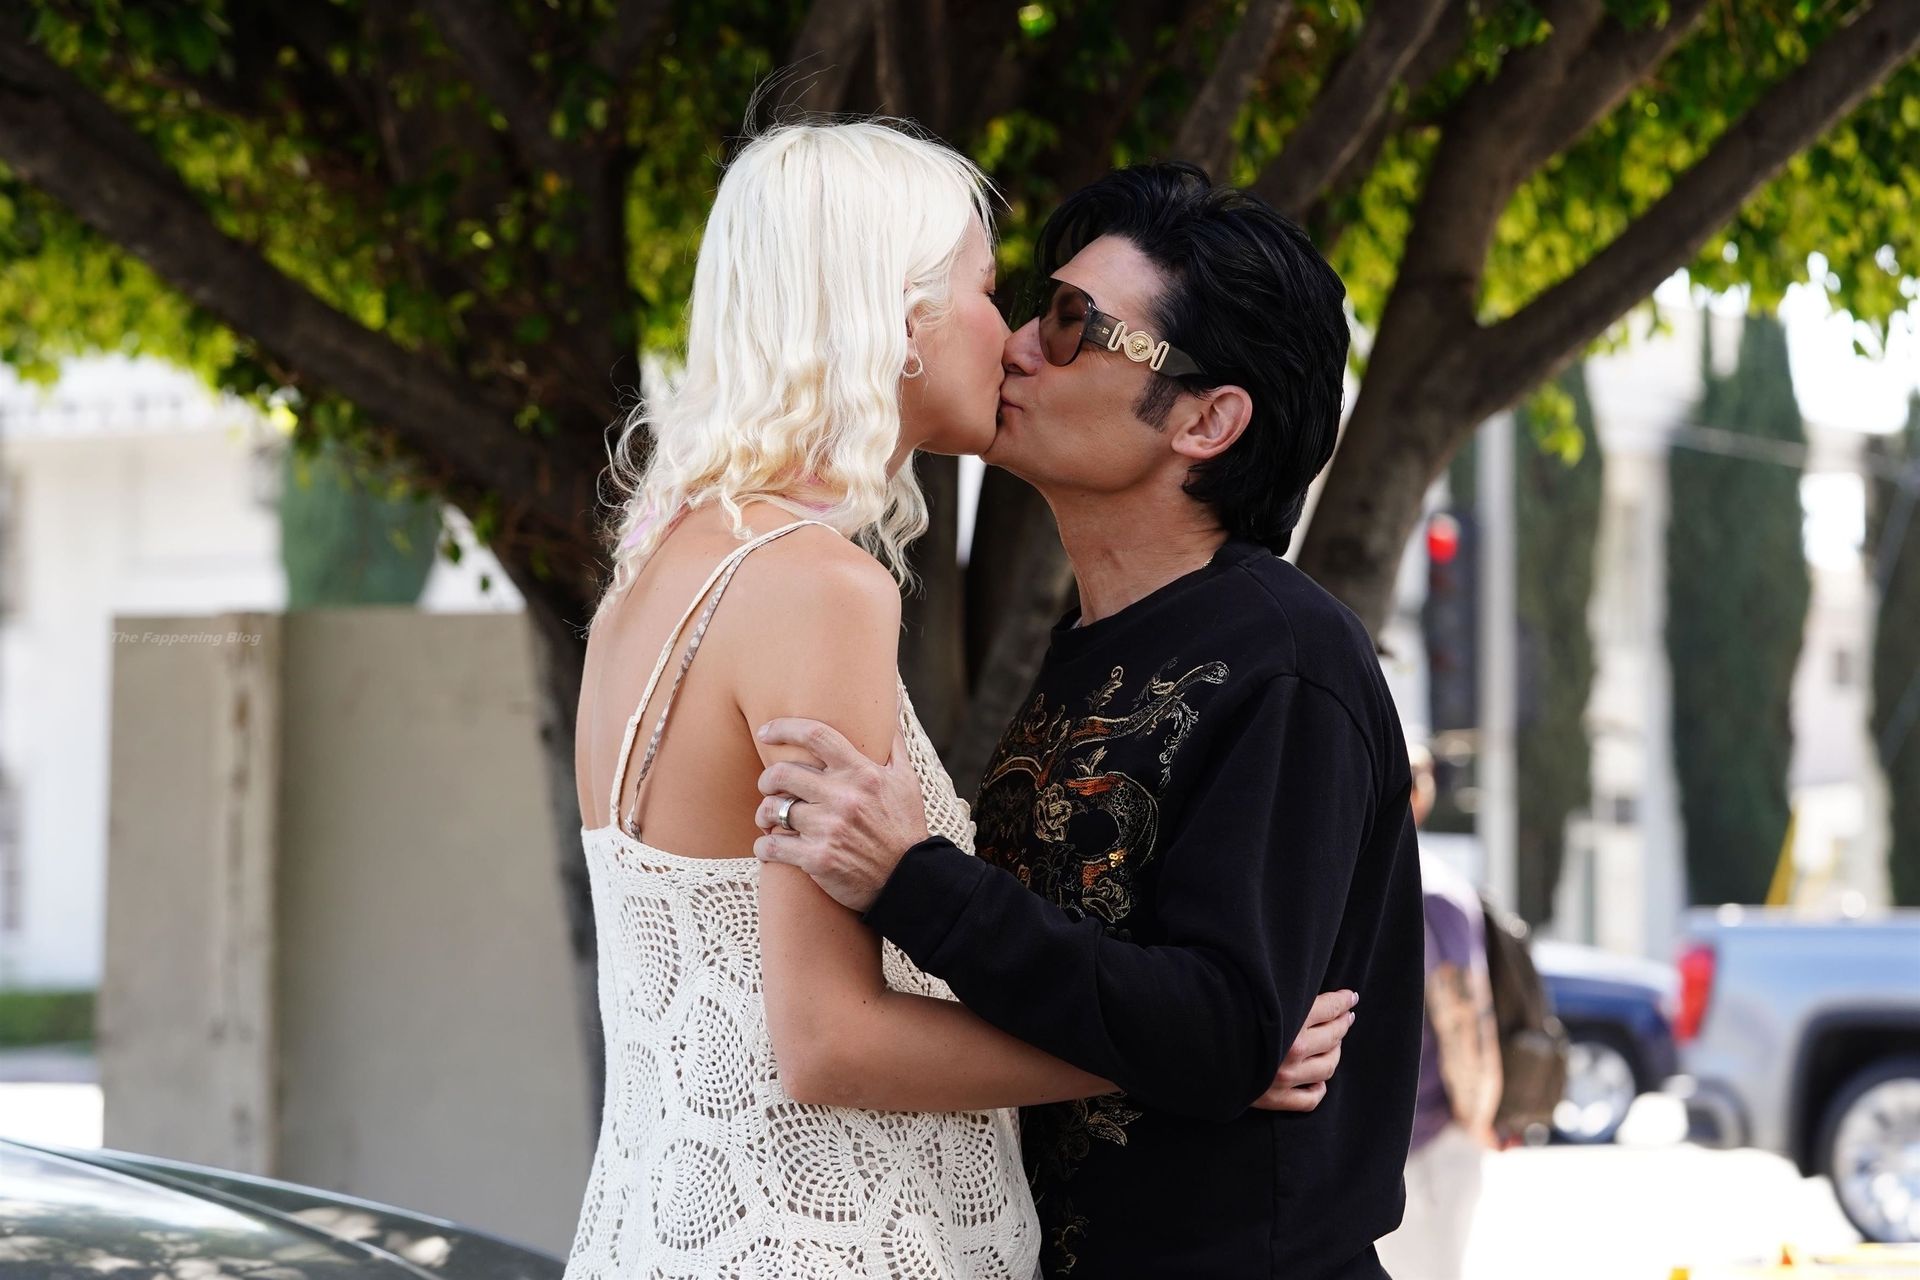 Courtney Anne Mitchell & Corey Feldman Arrive for a Shoot in North Holl...